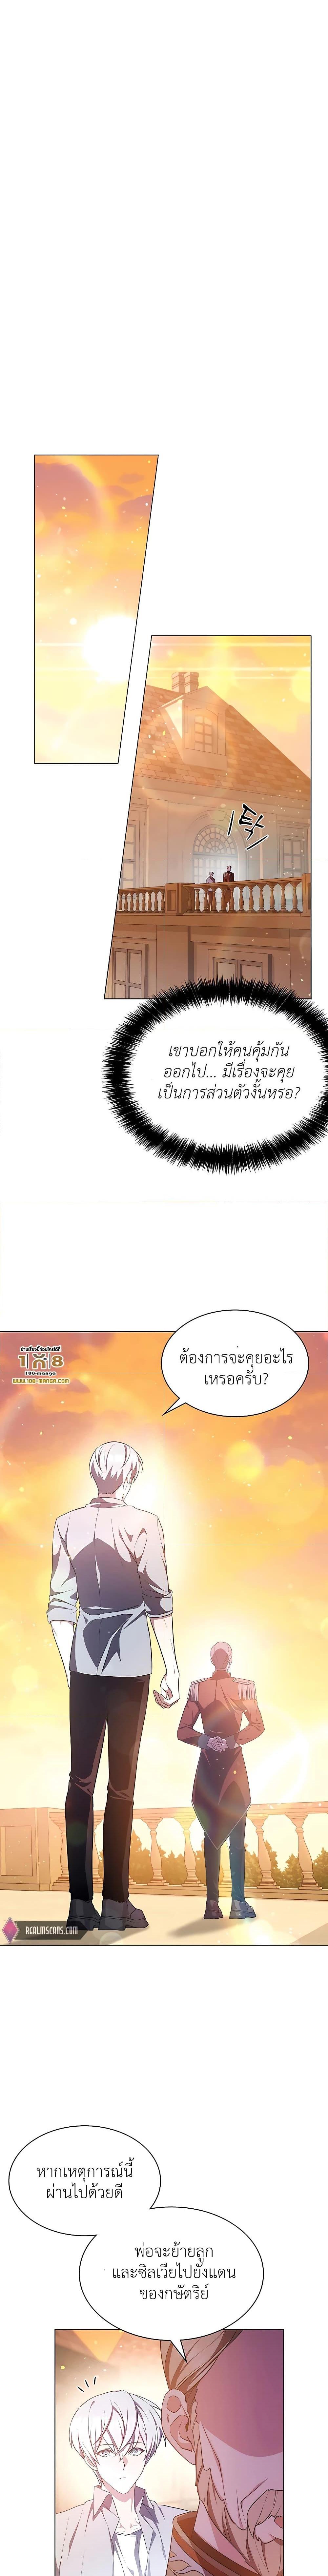 My Lucky Encounter From the Game Turned Into Reality ตอนที่ 4 (6)